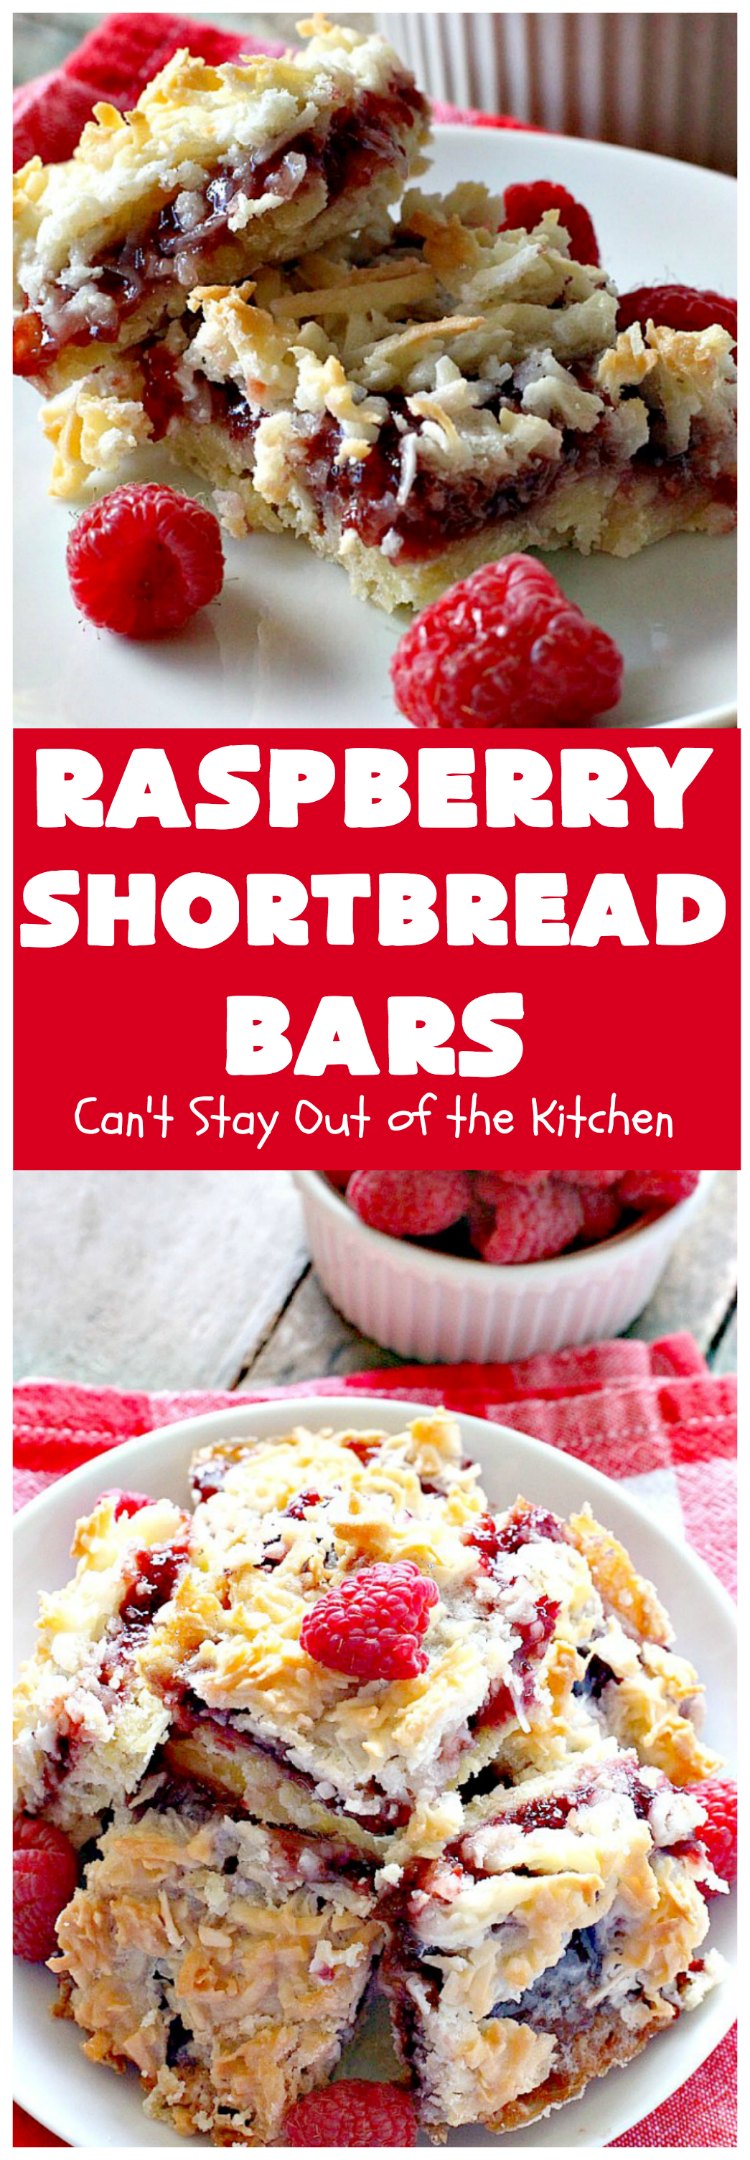 Raspberry Shortbread Bars | Can't Stay Out of the Kitchen